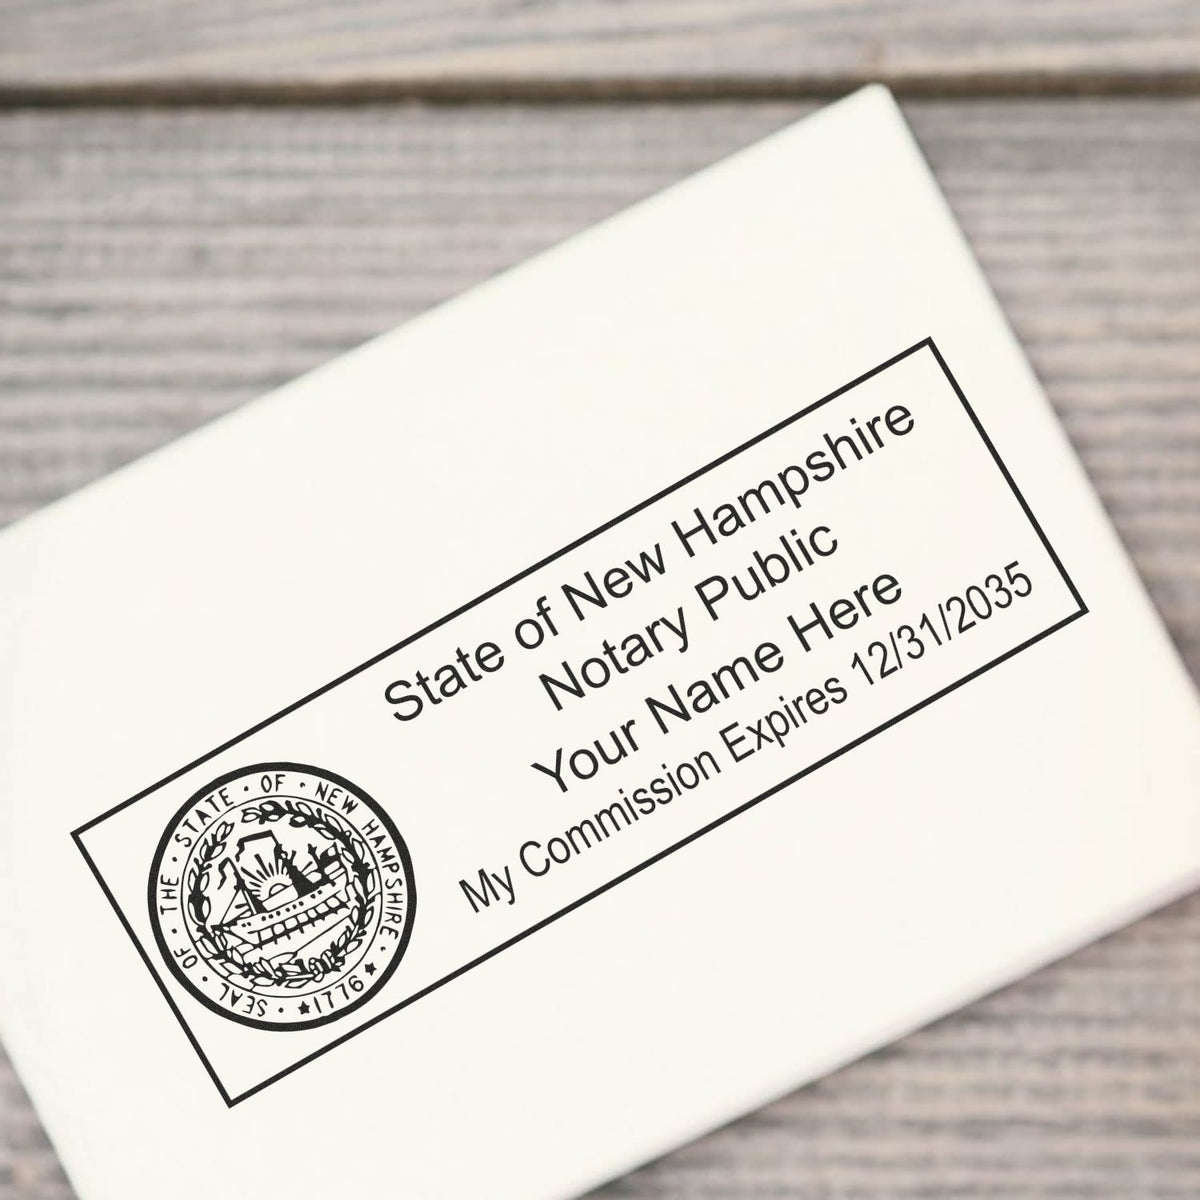 This paper is stamped with a sample imprint of the Super Slim New Hampshire Notary Public Stamp, signifying its quality and reliability.